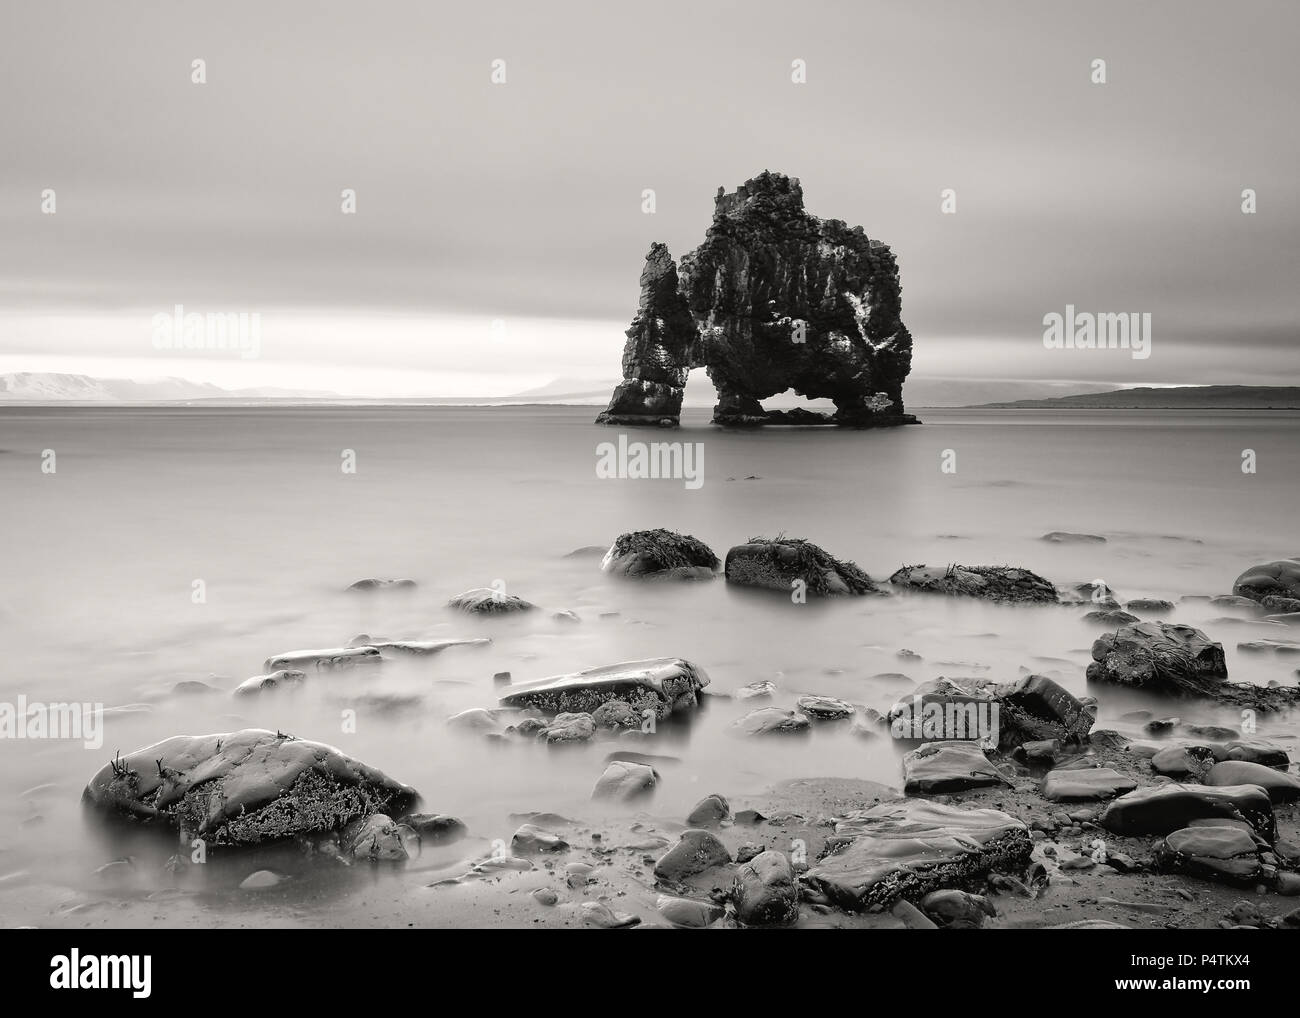 Scenic view of a striking rock formation in shallow water on a beach with stones - Location: Iceland, east coast of the Vatnsnes peninsula in the nort Stock Photo